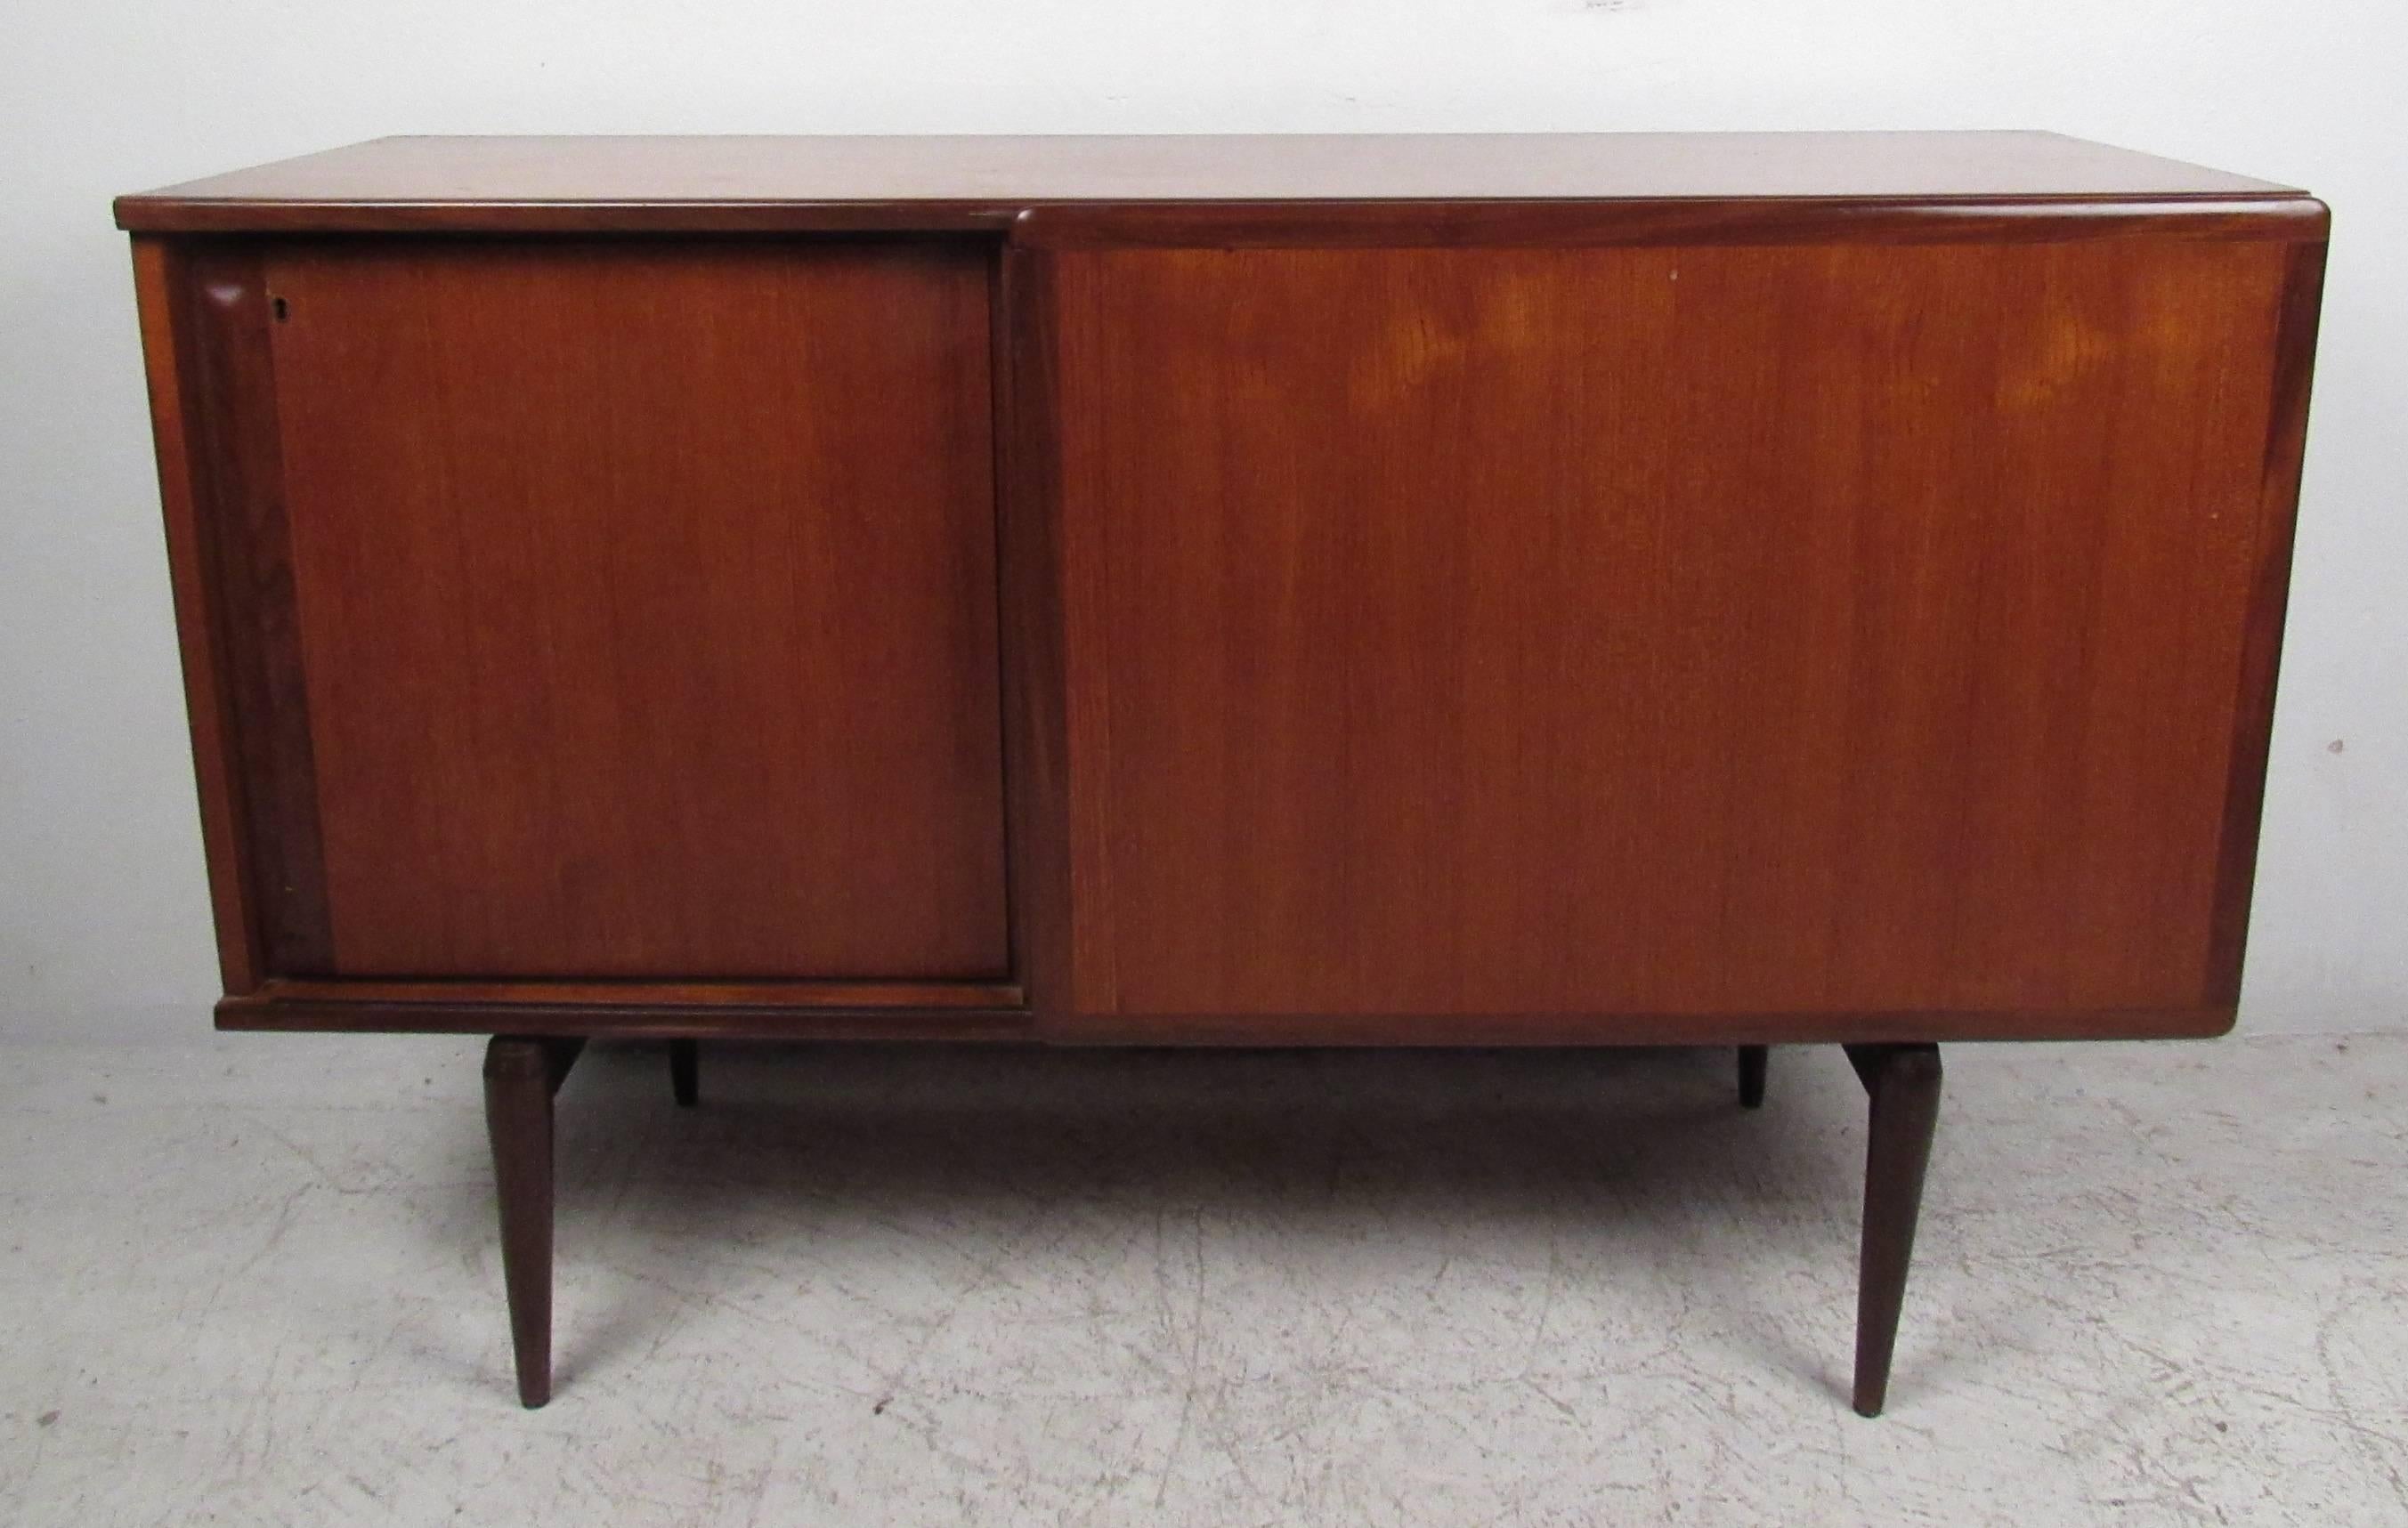 Unique Danish modern sliding door cabinet with adjustable shelves and rich teak finish. A petite design with tapered legs and plenty of room for storage within its large compartments. Please confirm item location (NY or NJ) with dealer.